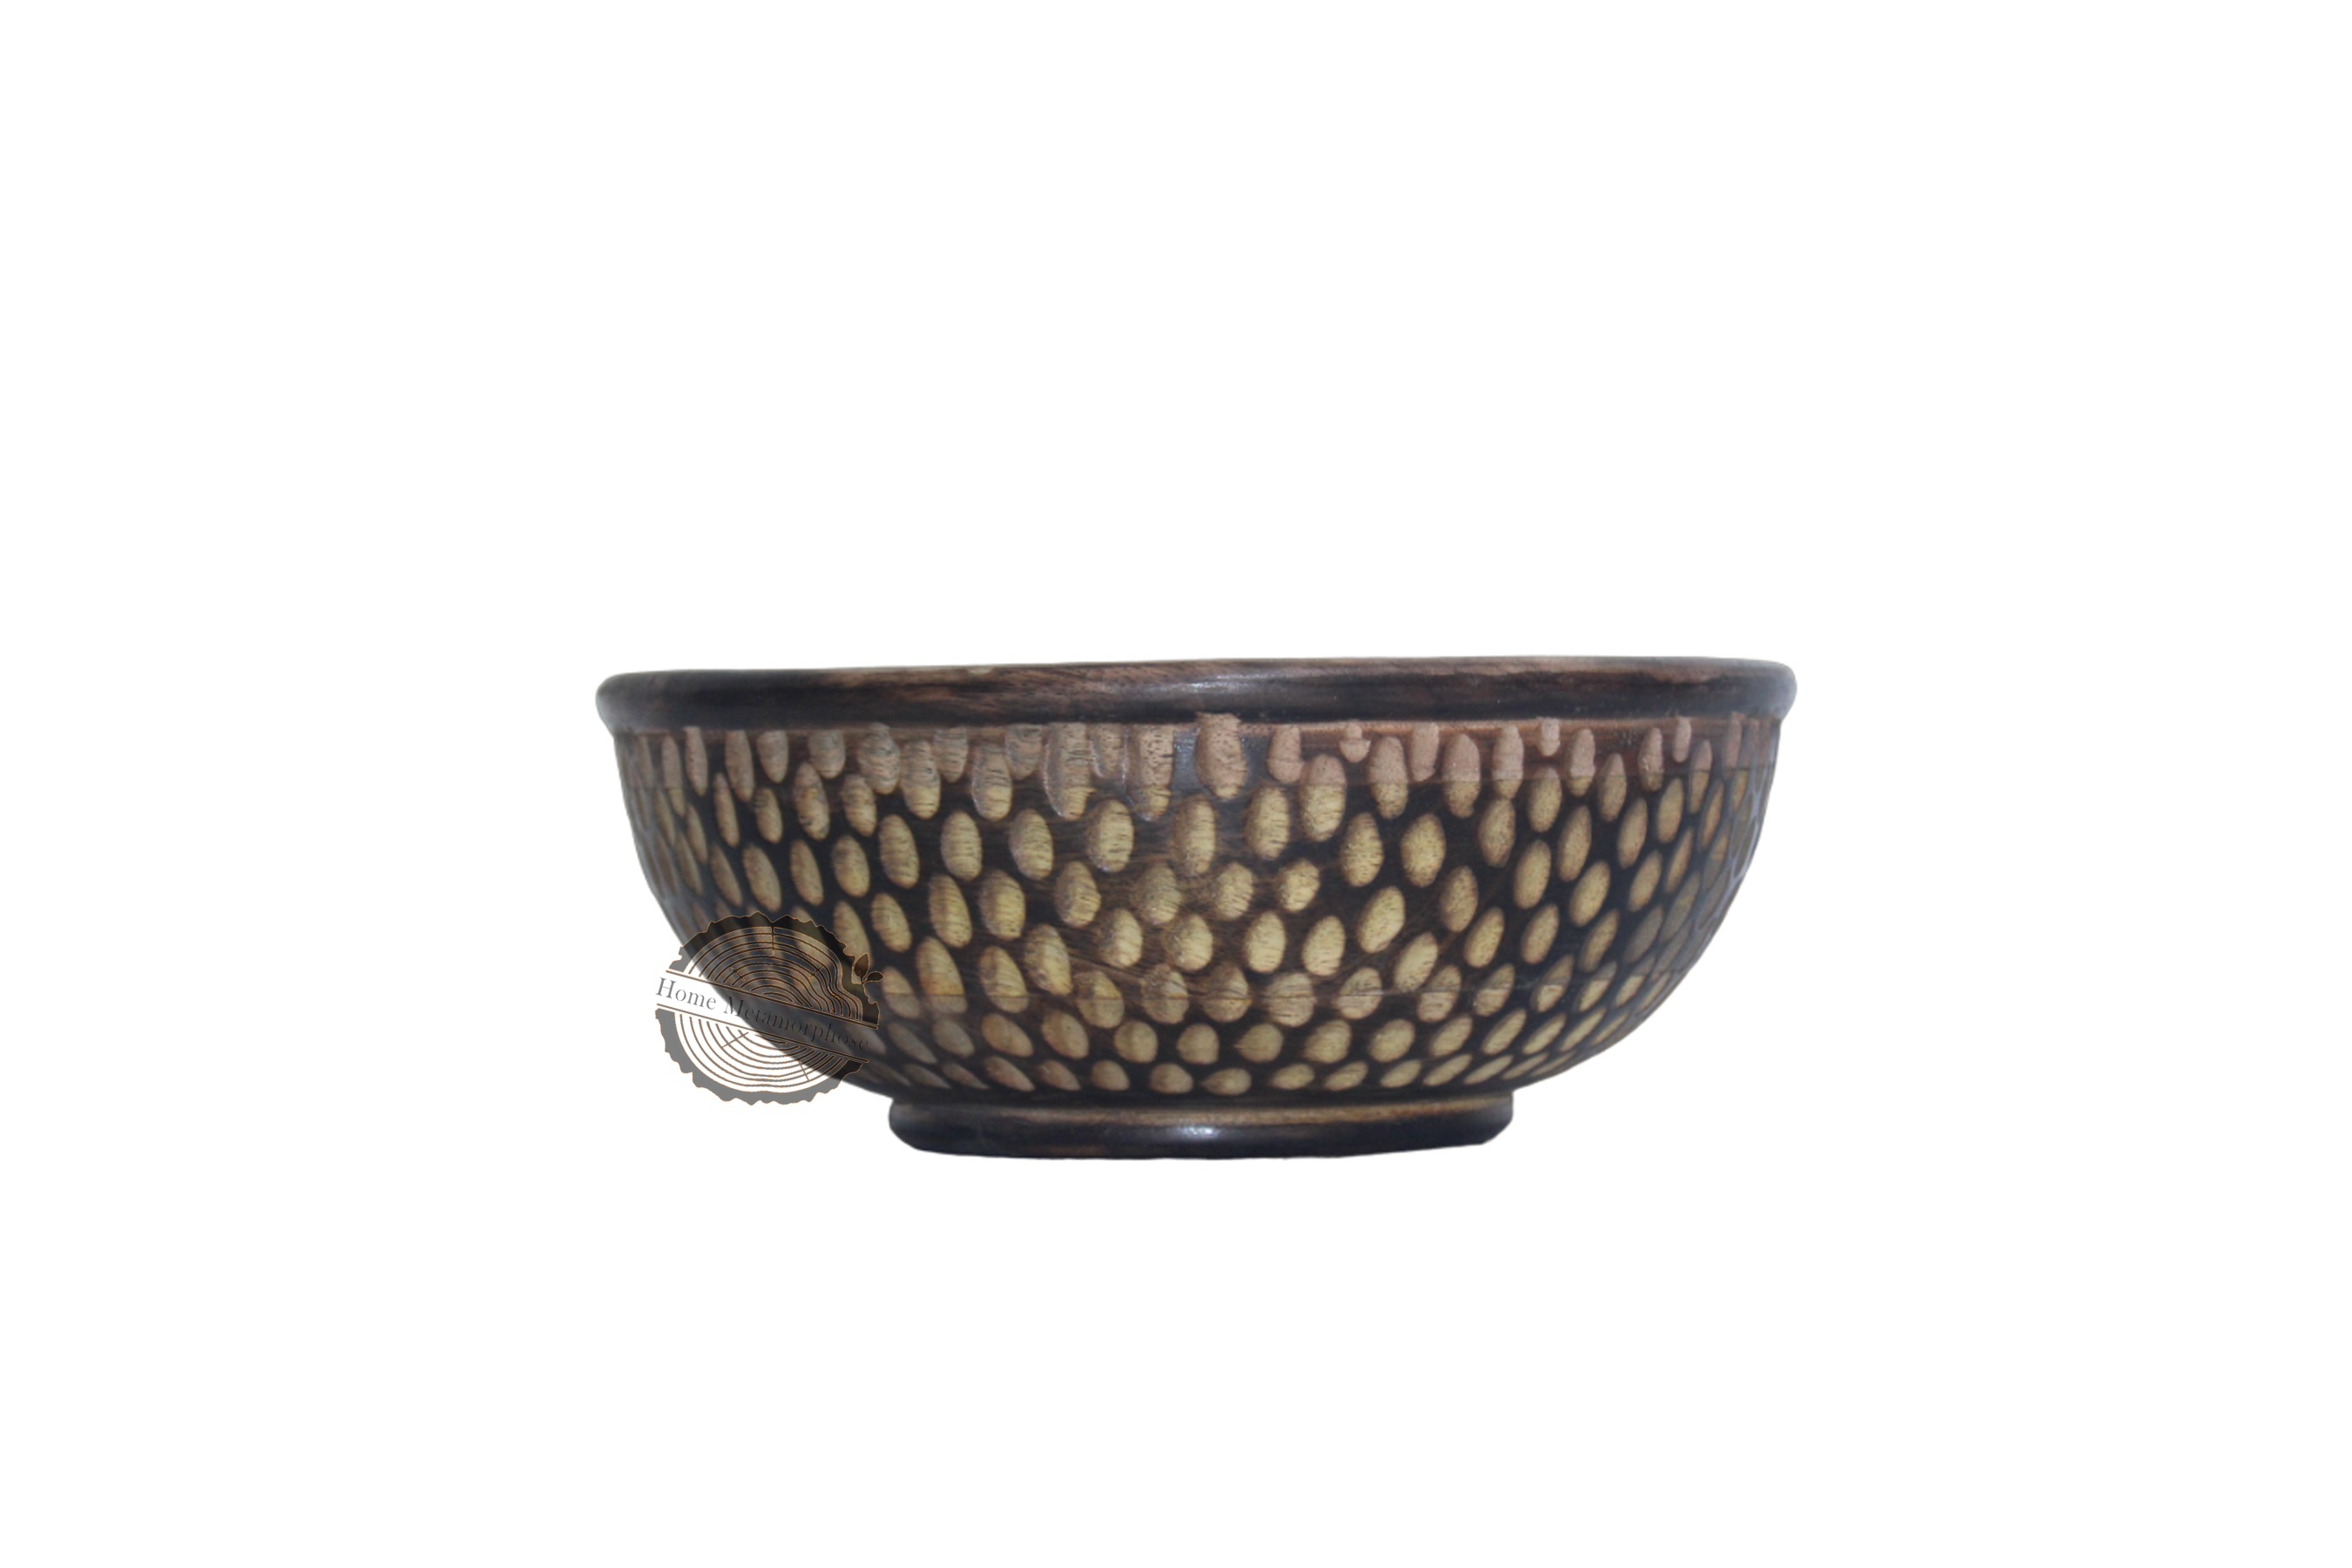 Mango Wood Decorative Wooden Bowl Hand Carved Home Decor for Dining Table Center, Living Room, Kitchen Décor (12